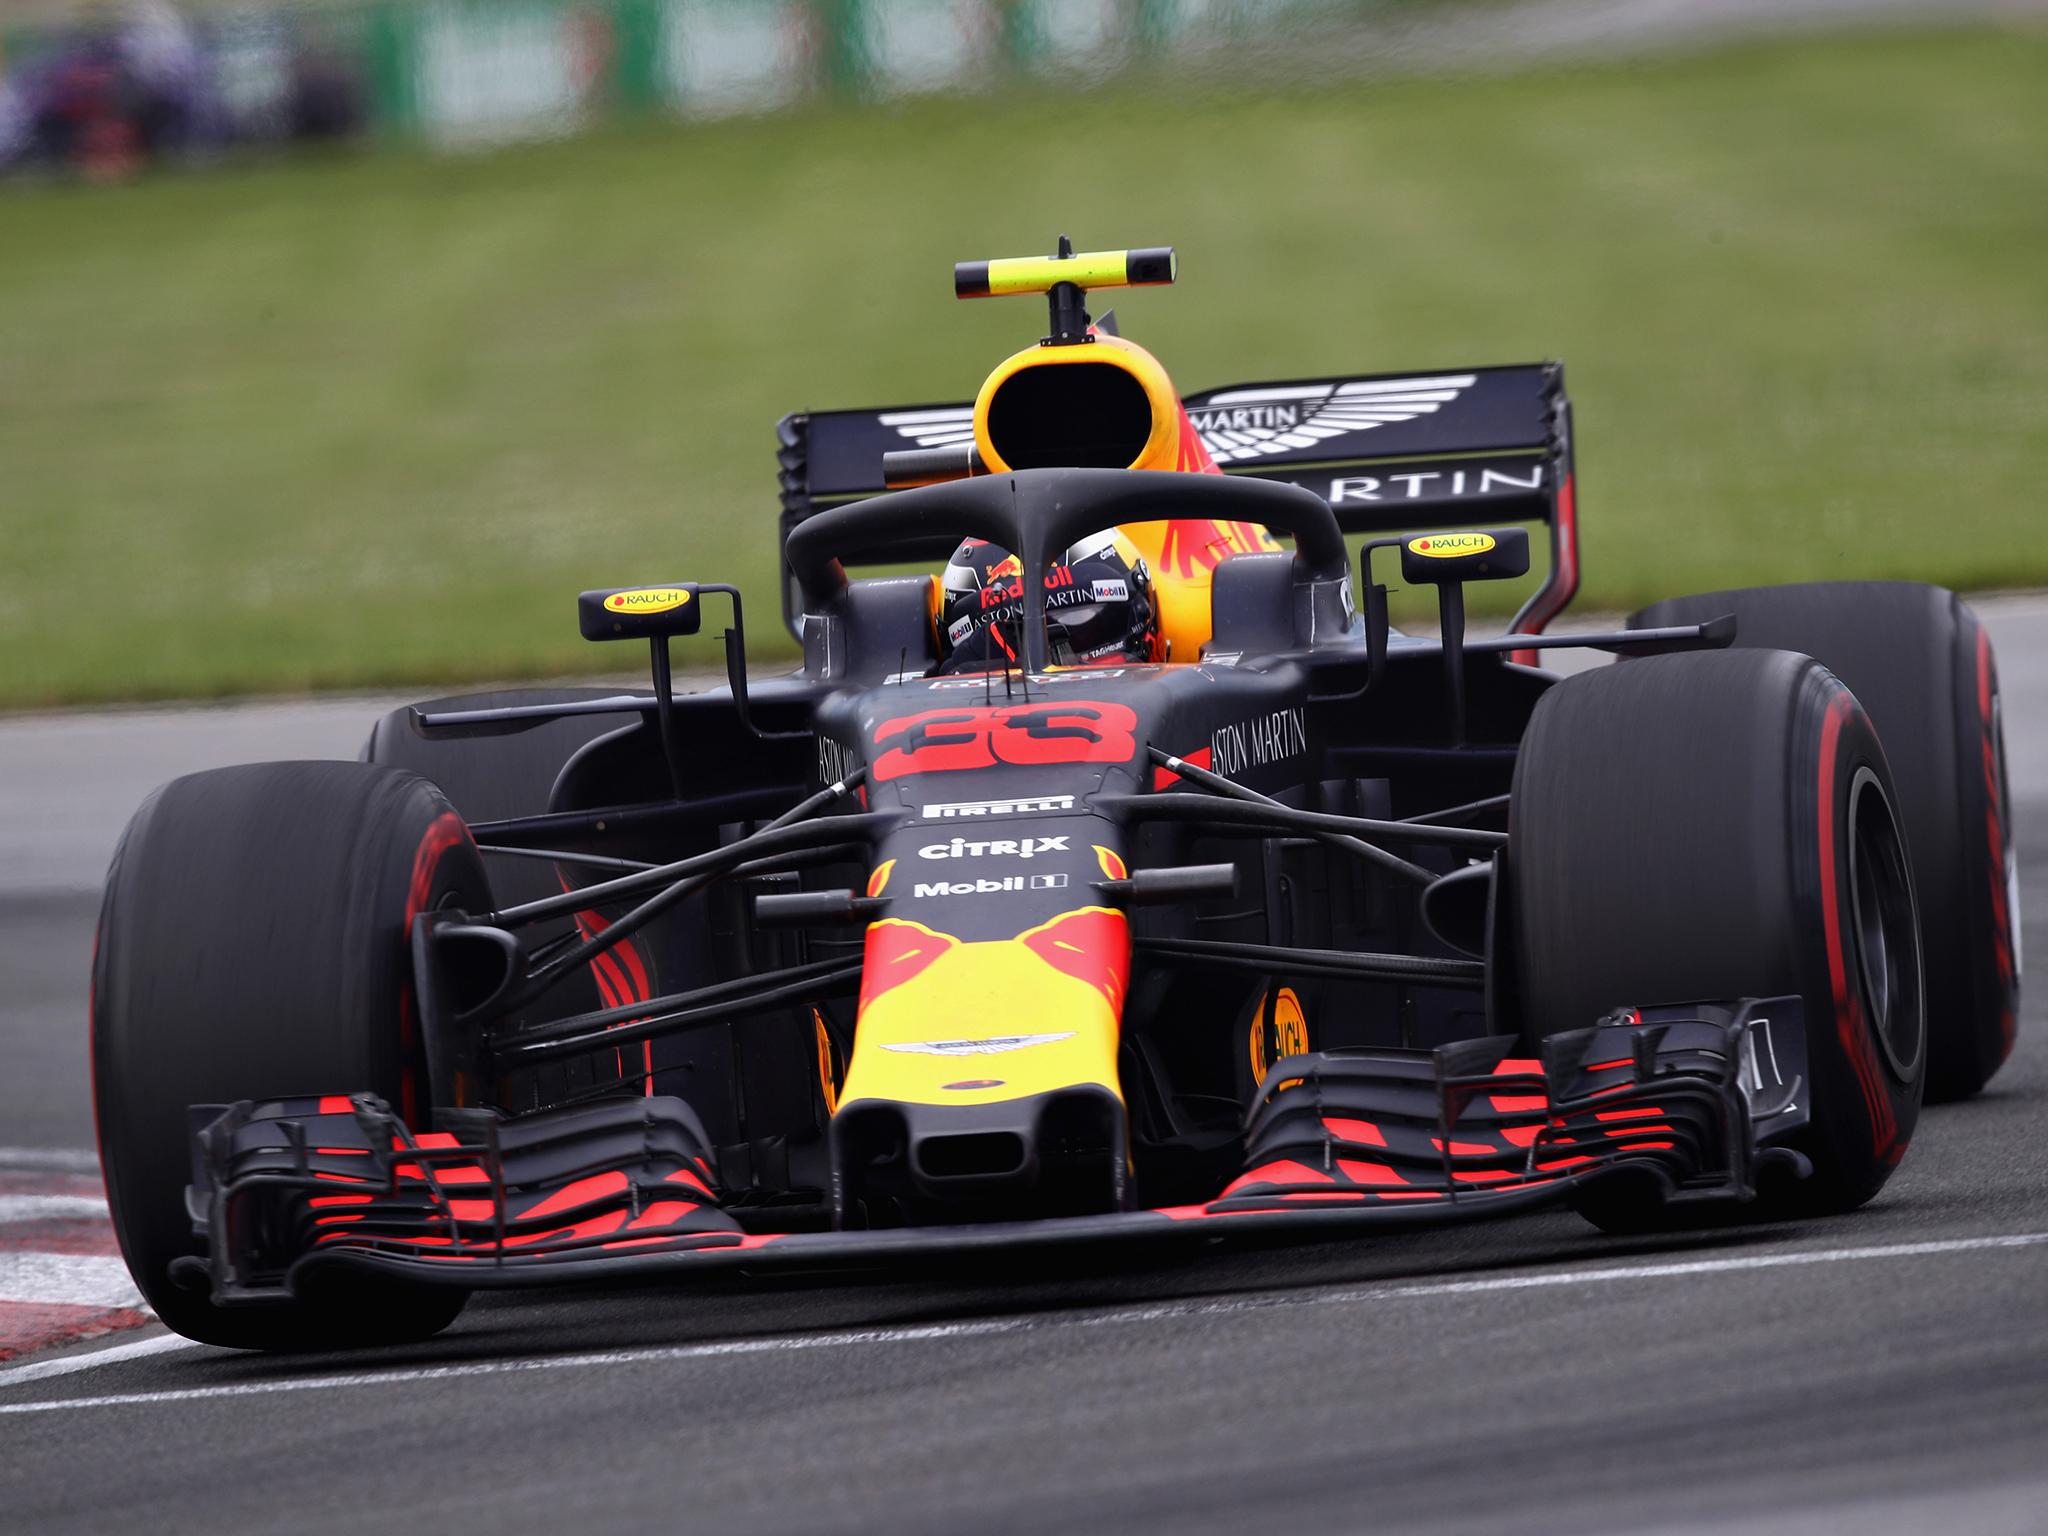 Red Bull will use Honda engines from 2019 after ending their deal with Renault